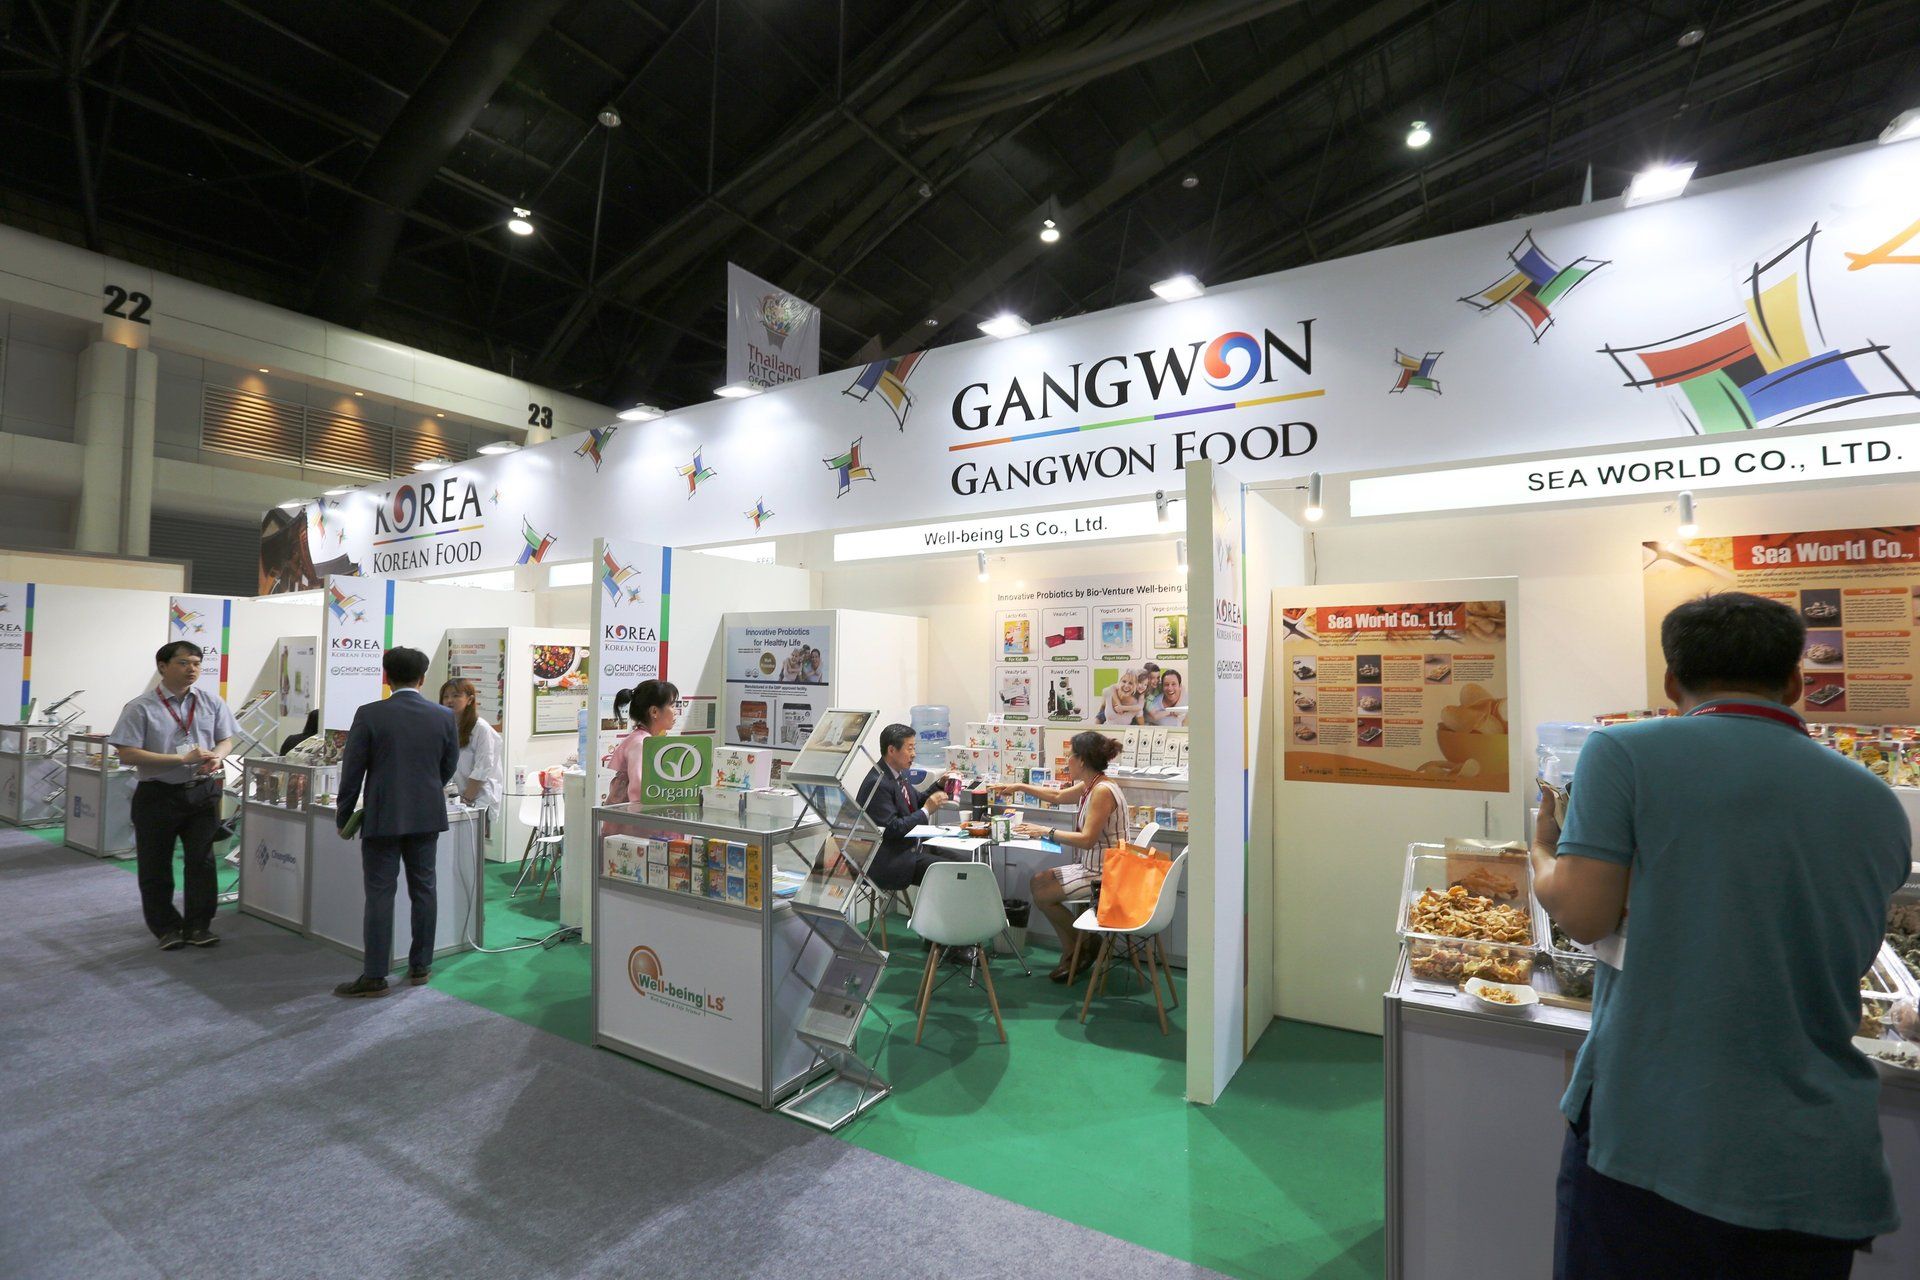 Korea Pavilion @ Thaifex 2015. Booth designed and built by Essential Global Fairs.